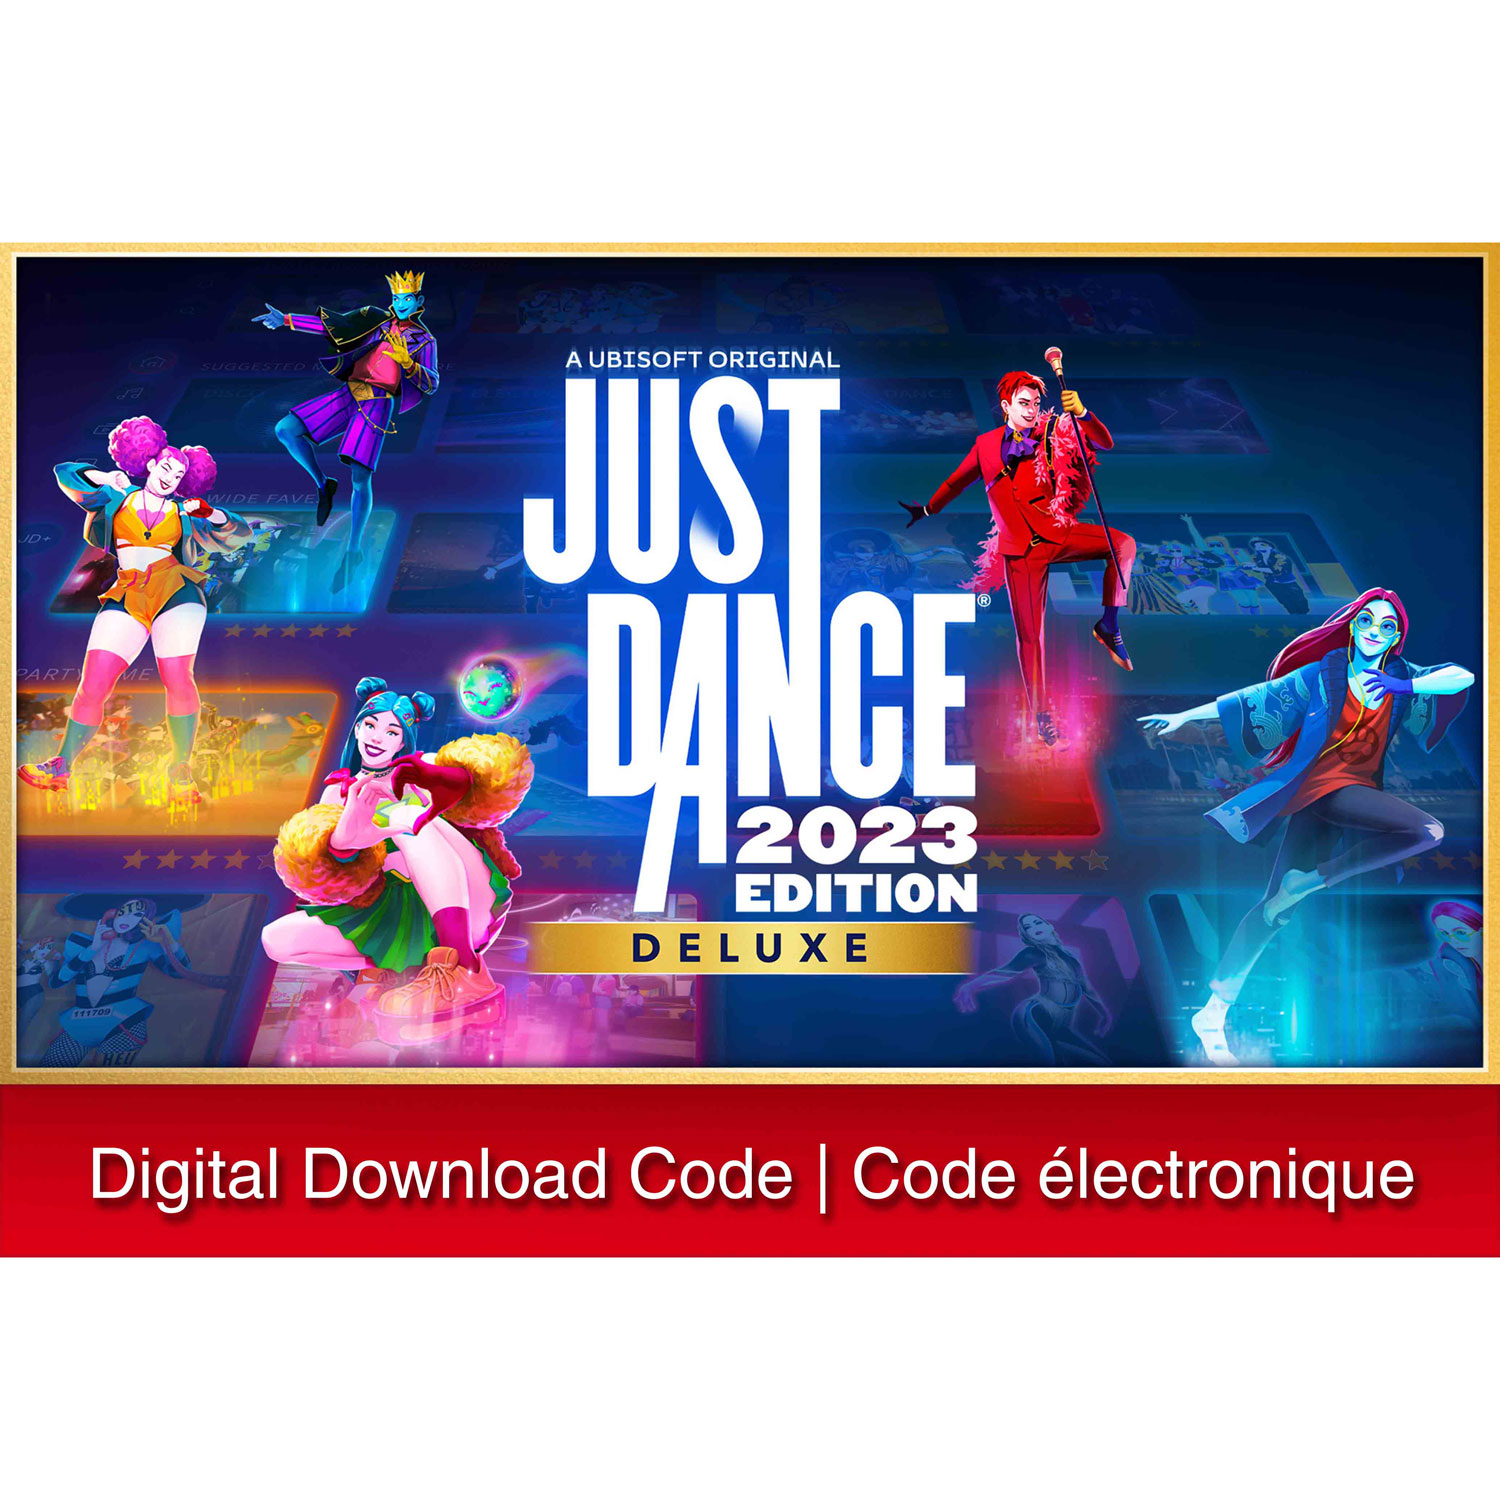 Just Dance 2023 Deluxe Edition (Switch) - Digital Download